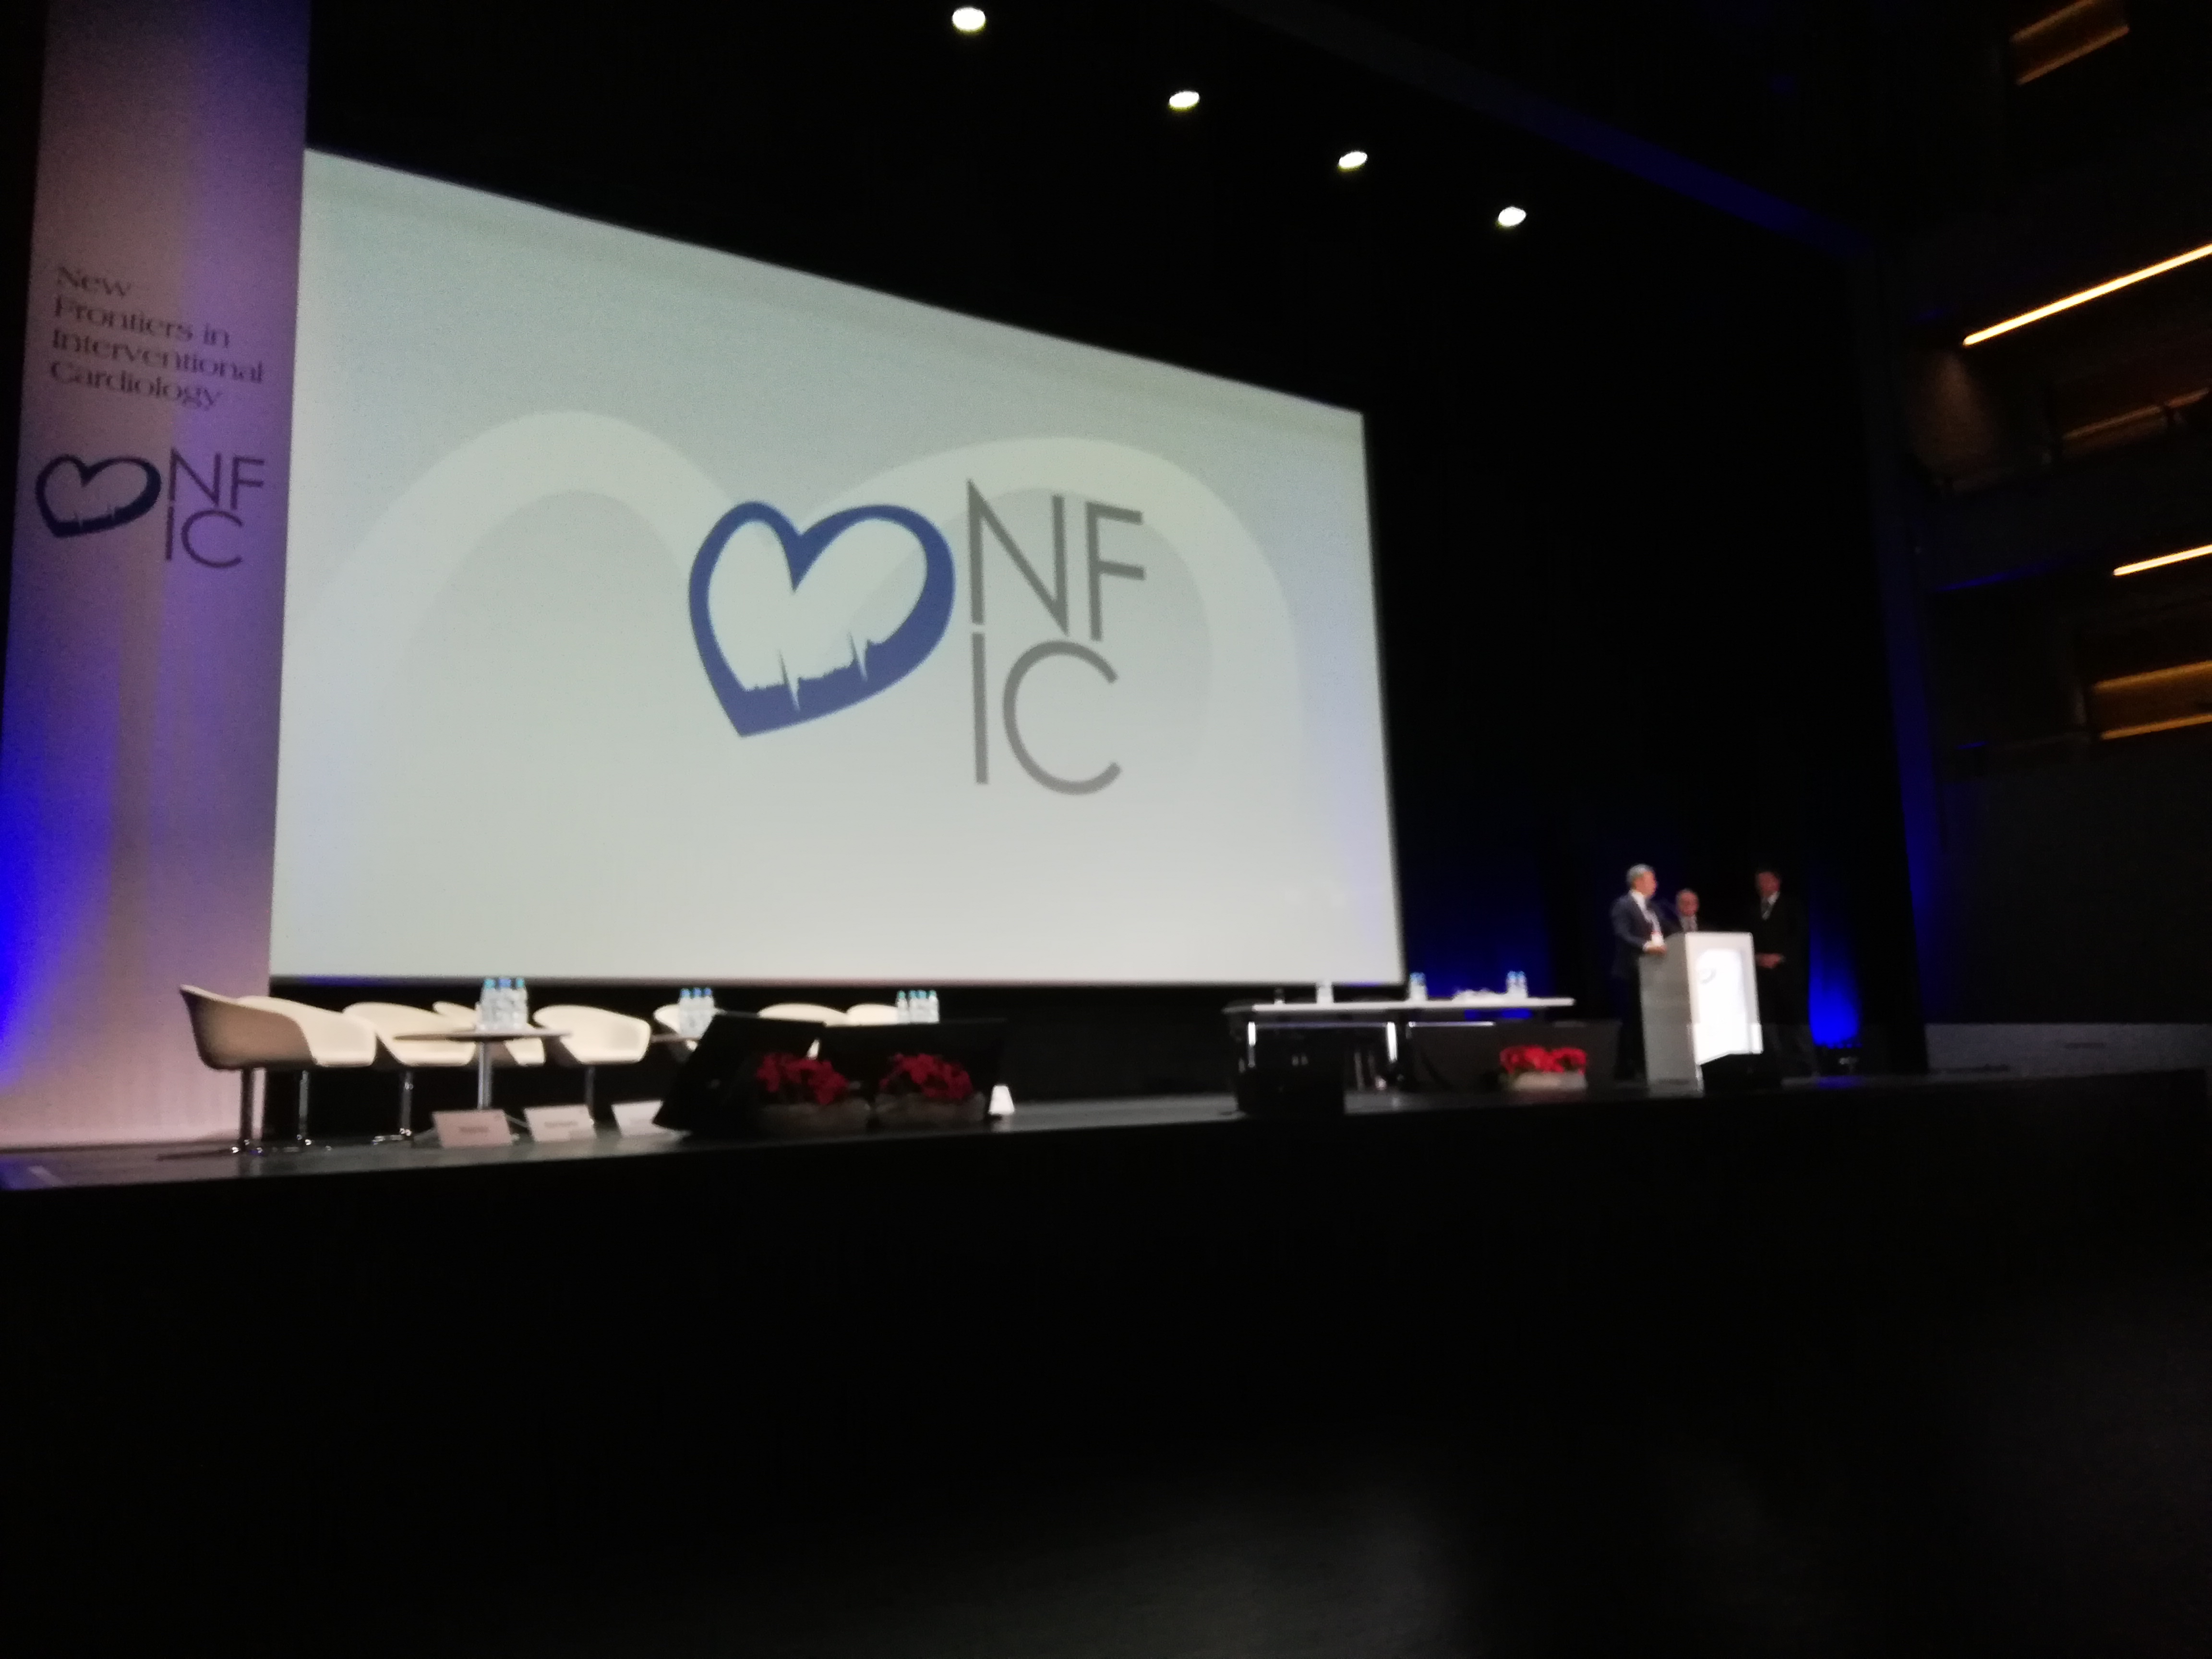 NFIC 2018 in Cracow